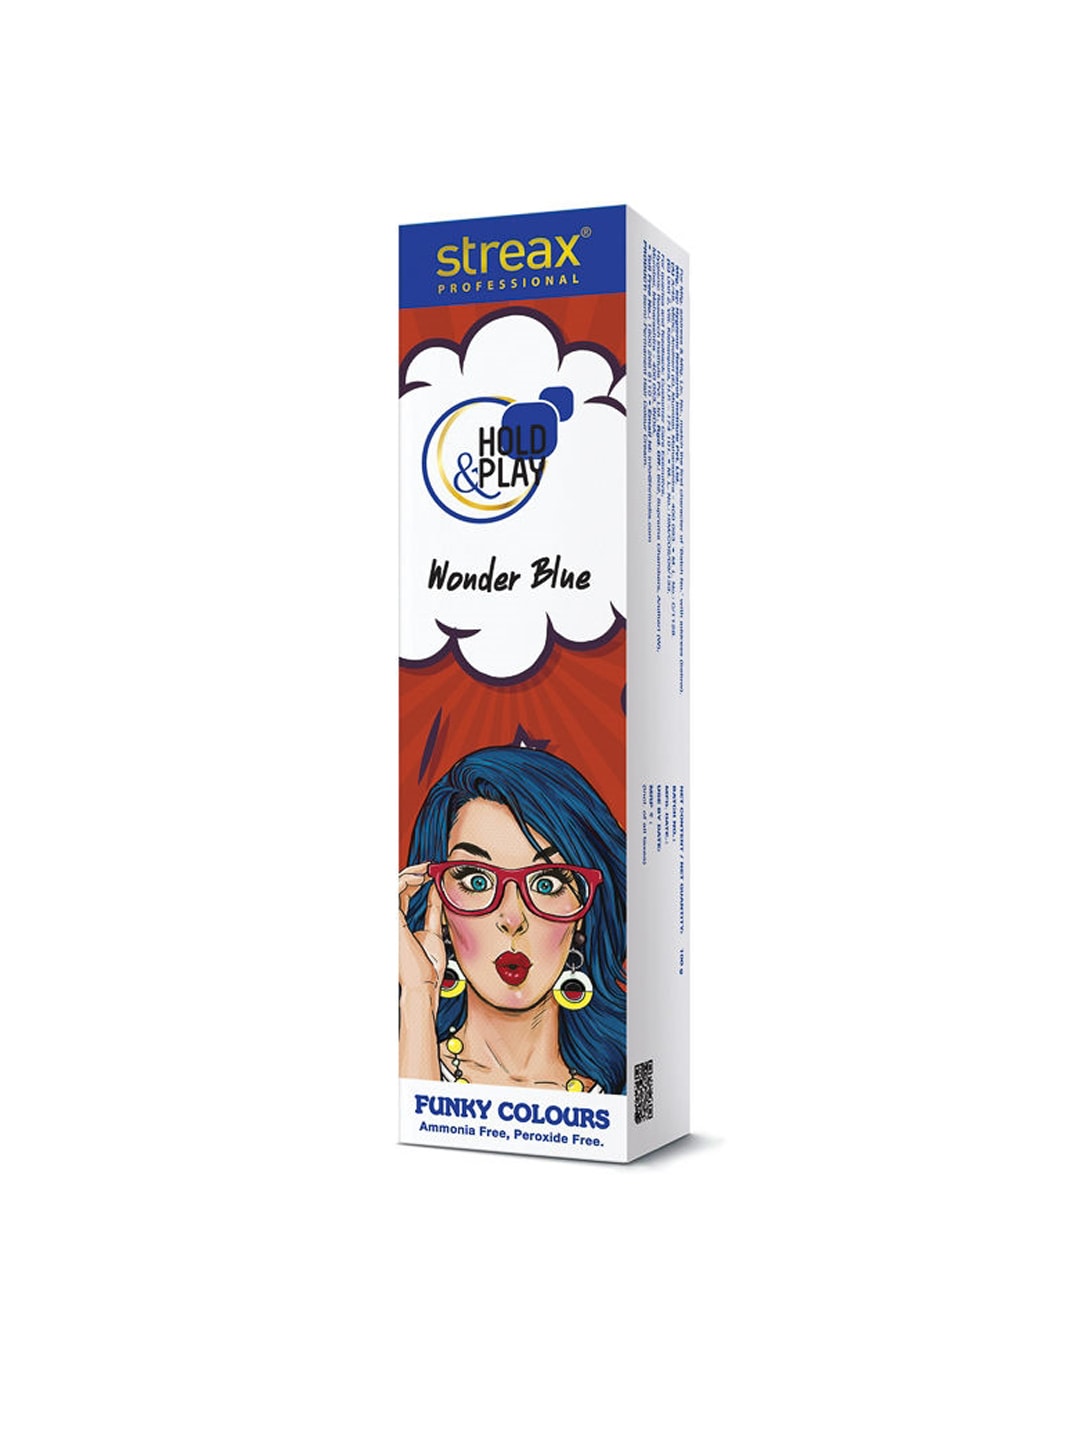 Streax Professional Hold & Play Funky Colour - Wonder Blue- 100 g Price in India